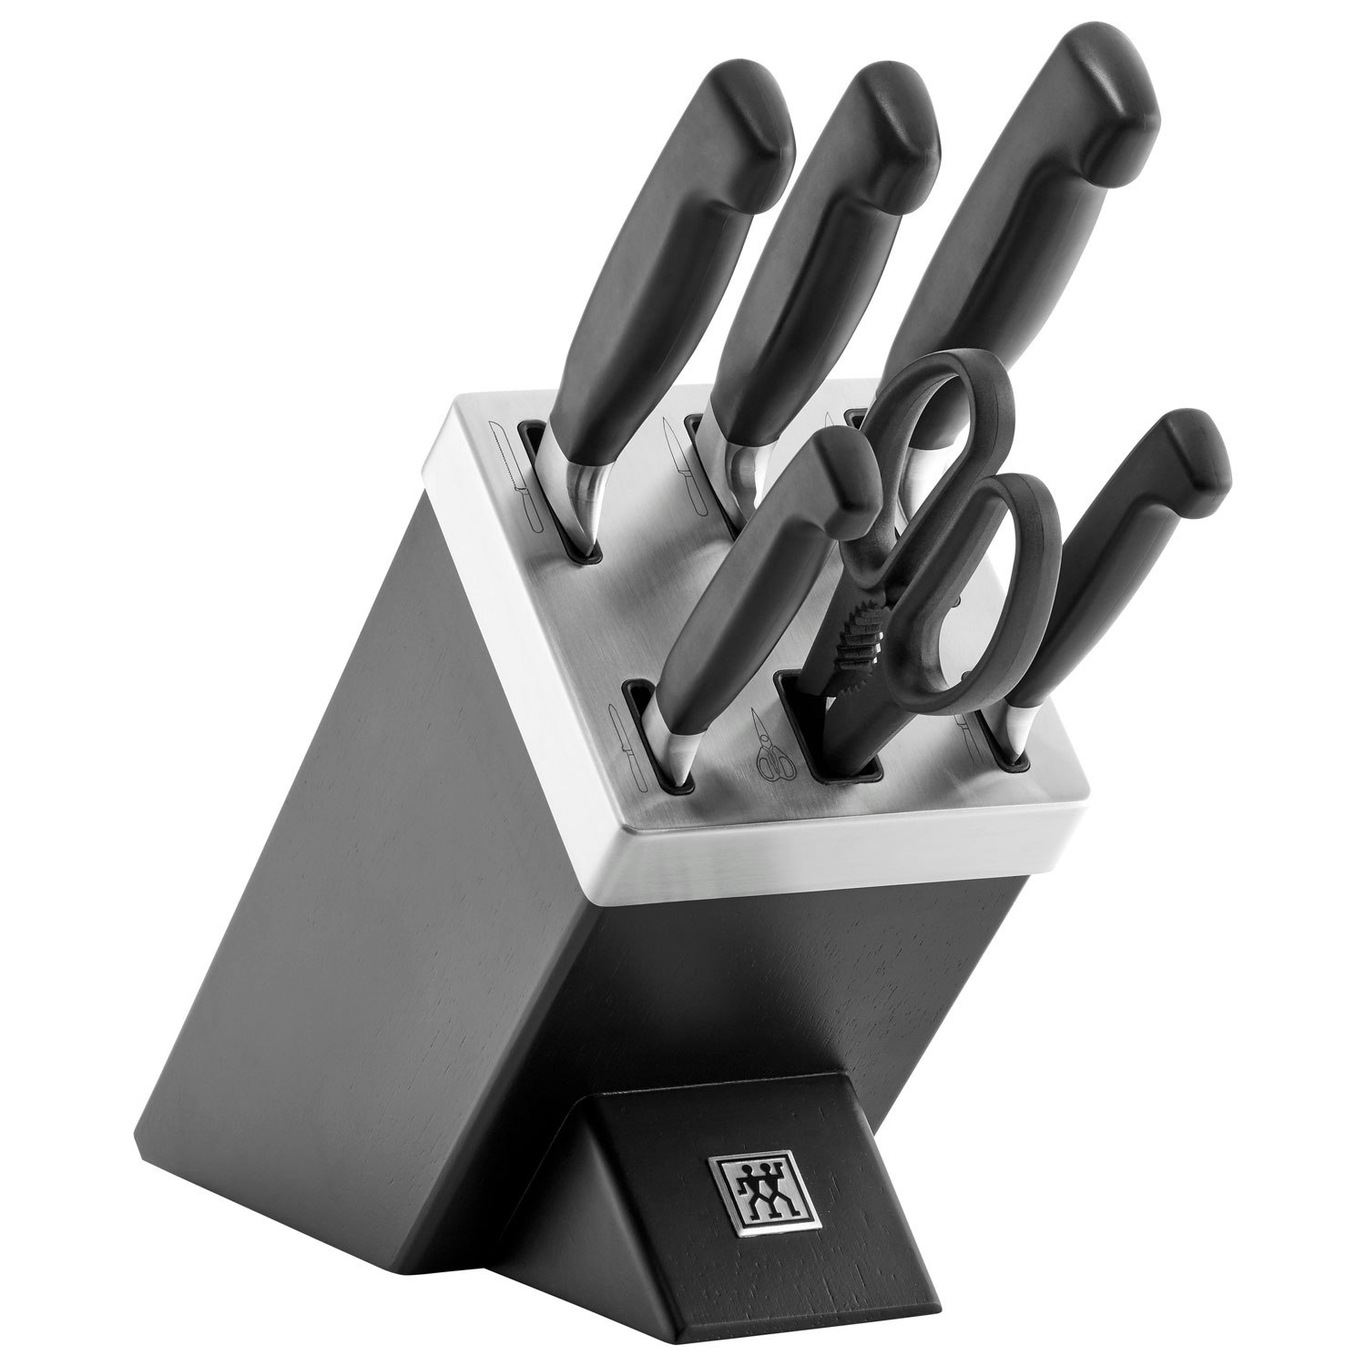 Four Star Knife Block Self-sharpening, 7 Pieces - Zwilling